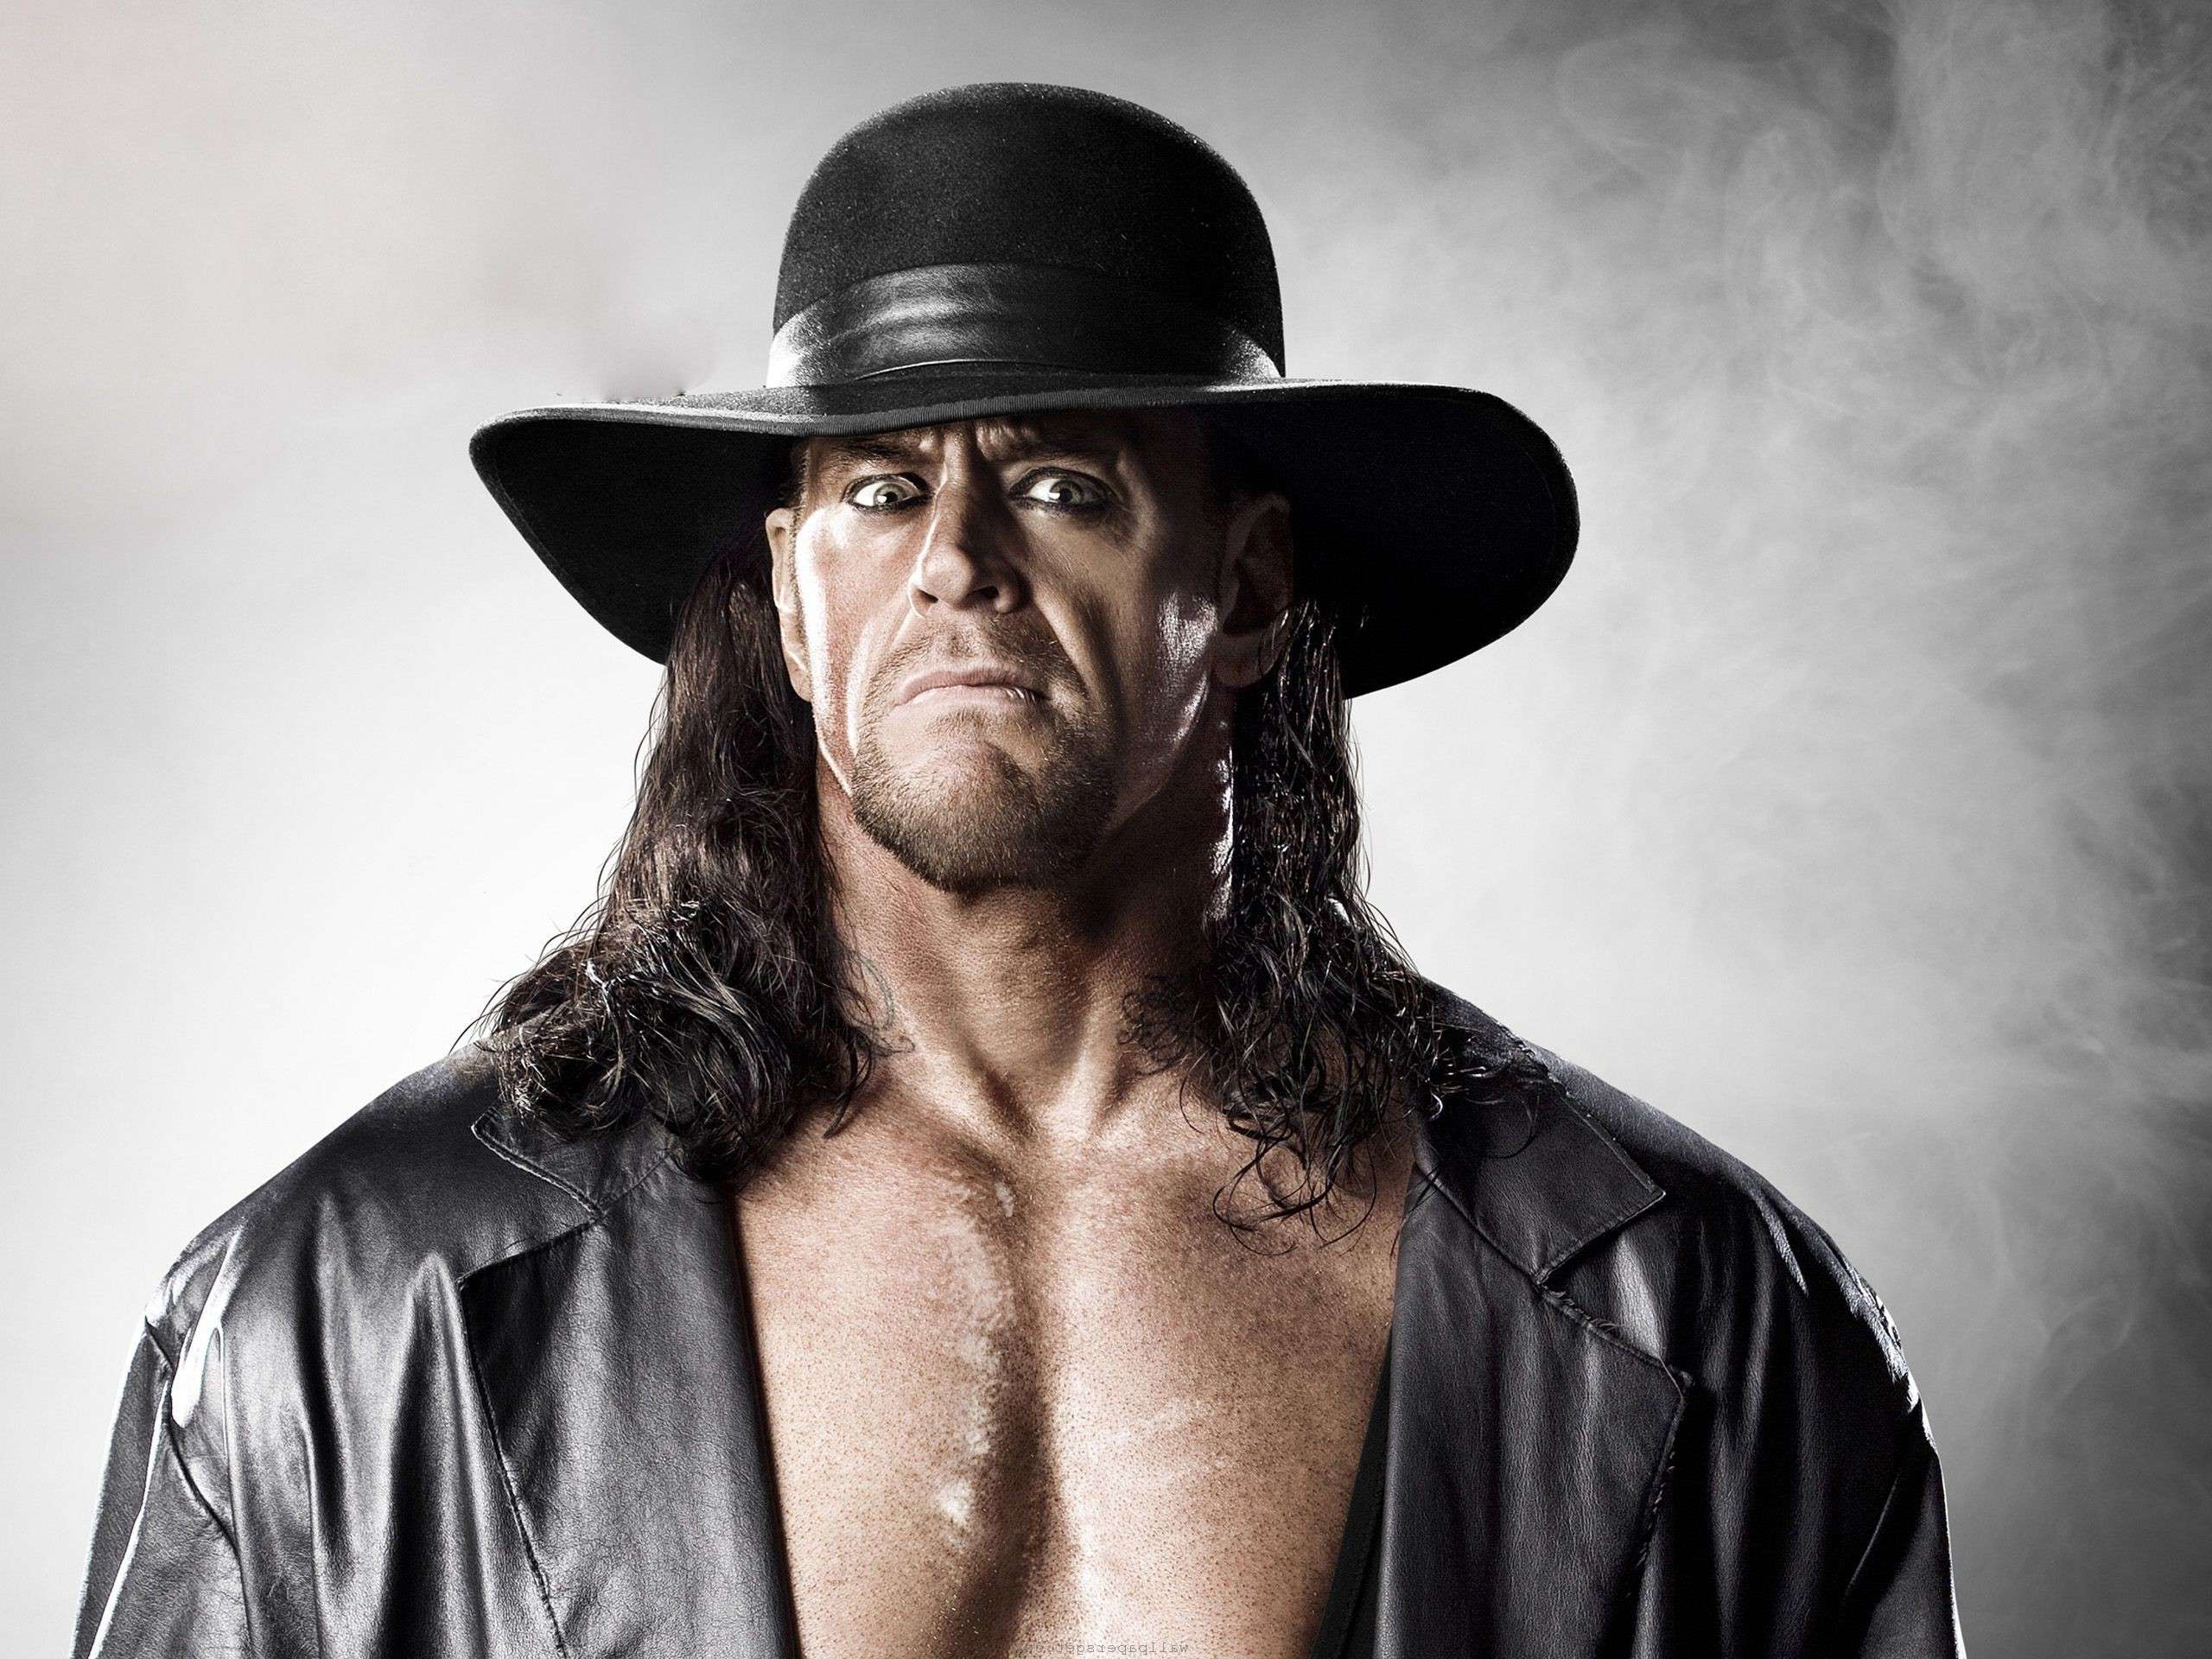 the undertaker: Latest News, Videos and the undertaker Photos | Times of  India